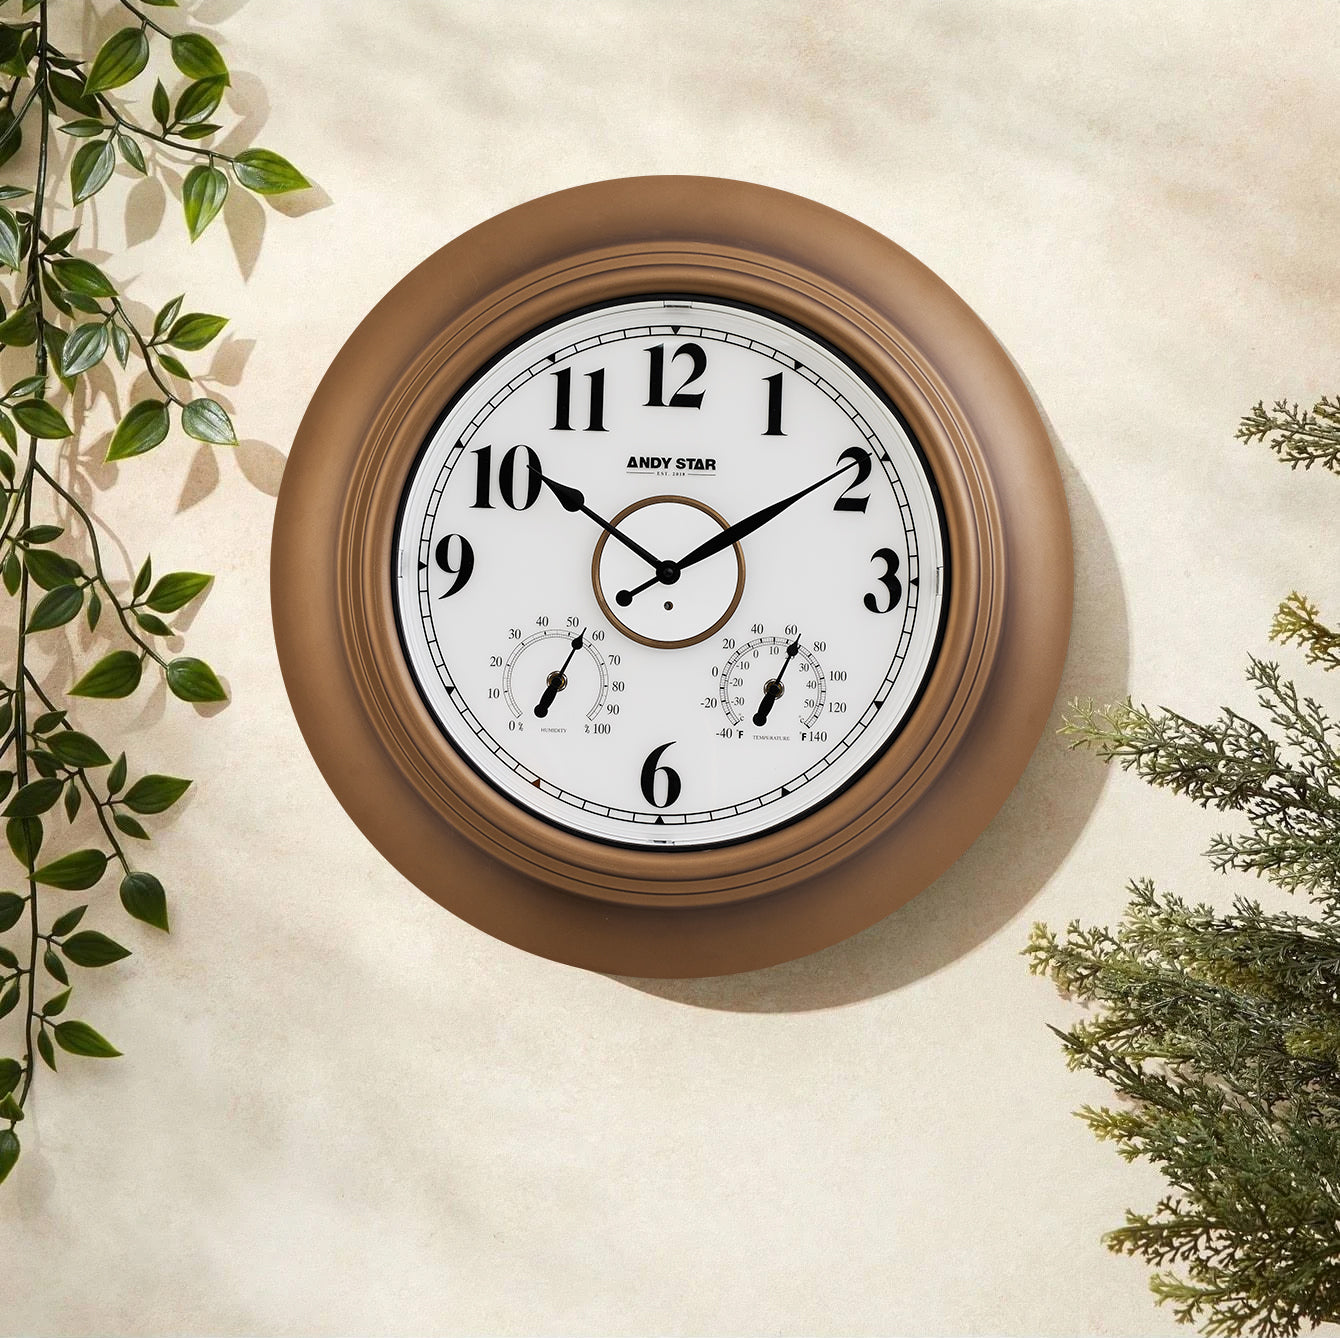 Vintage Indoor Outdoor Wall Clock with Thermometer Weatherproof Large Lighted Clocks for Patio, Garden